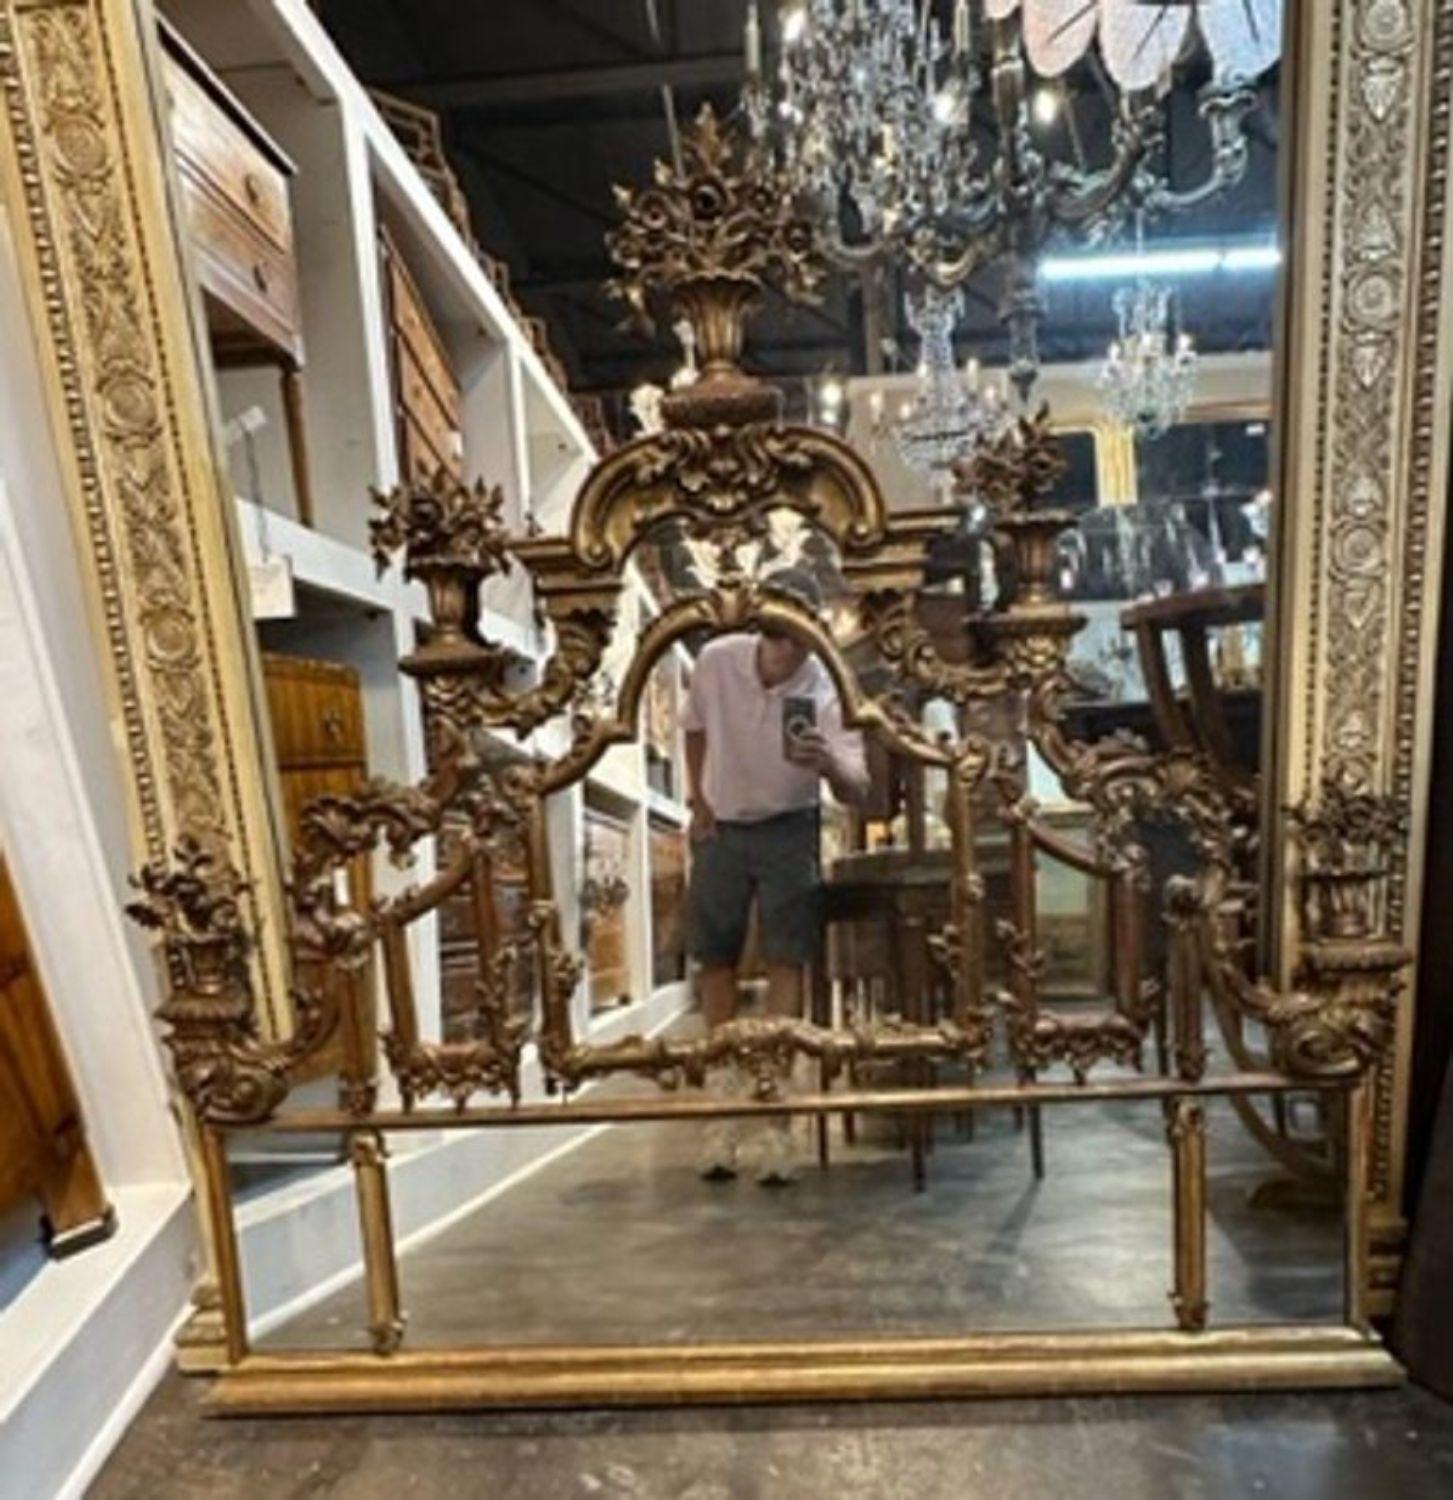 Lovely 19th century Italian carved mirror or headboard. Featuring beautiful intricate carvings! A stunning piece!!